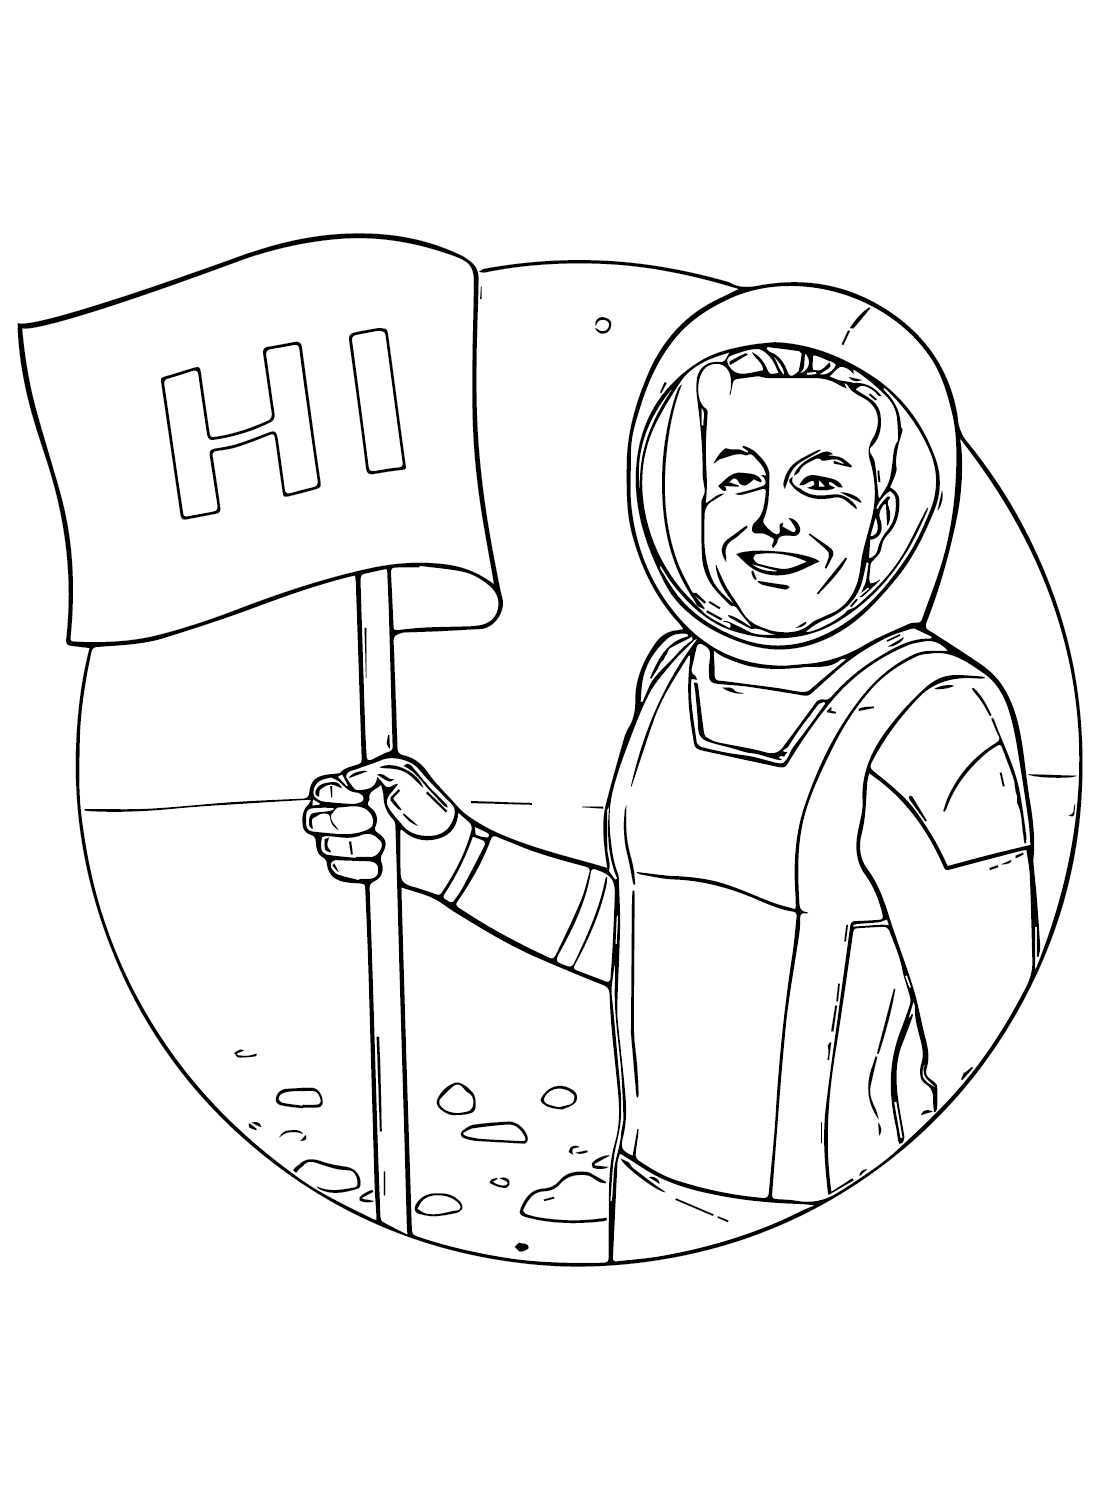 Elon Musk-Astronaut Coloring Pages